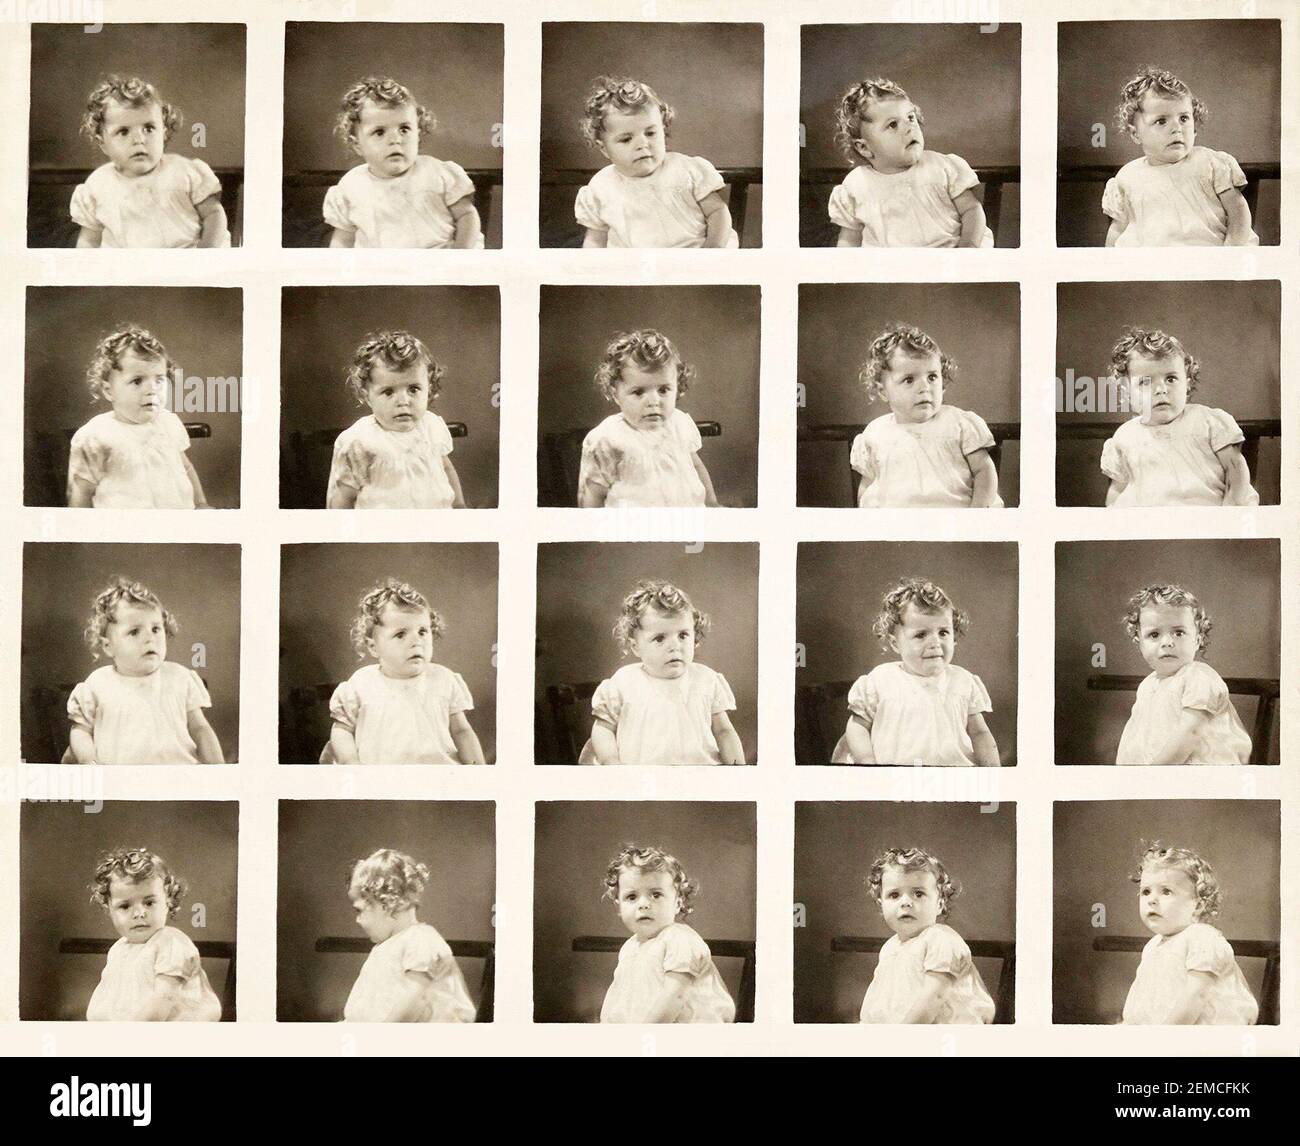 1943 wartime non standard polyphoto type of photographic contact sheet taken in a booth or studio possibly cut out of a full 48 image standard set showing black and white portraits of a one year old baby girl in various poses for customer to supposedly order selected images at a larger size this is an historical archive image of the way we were in 1940s Essex England UK Stock Photo